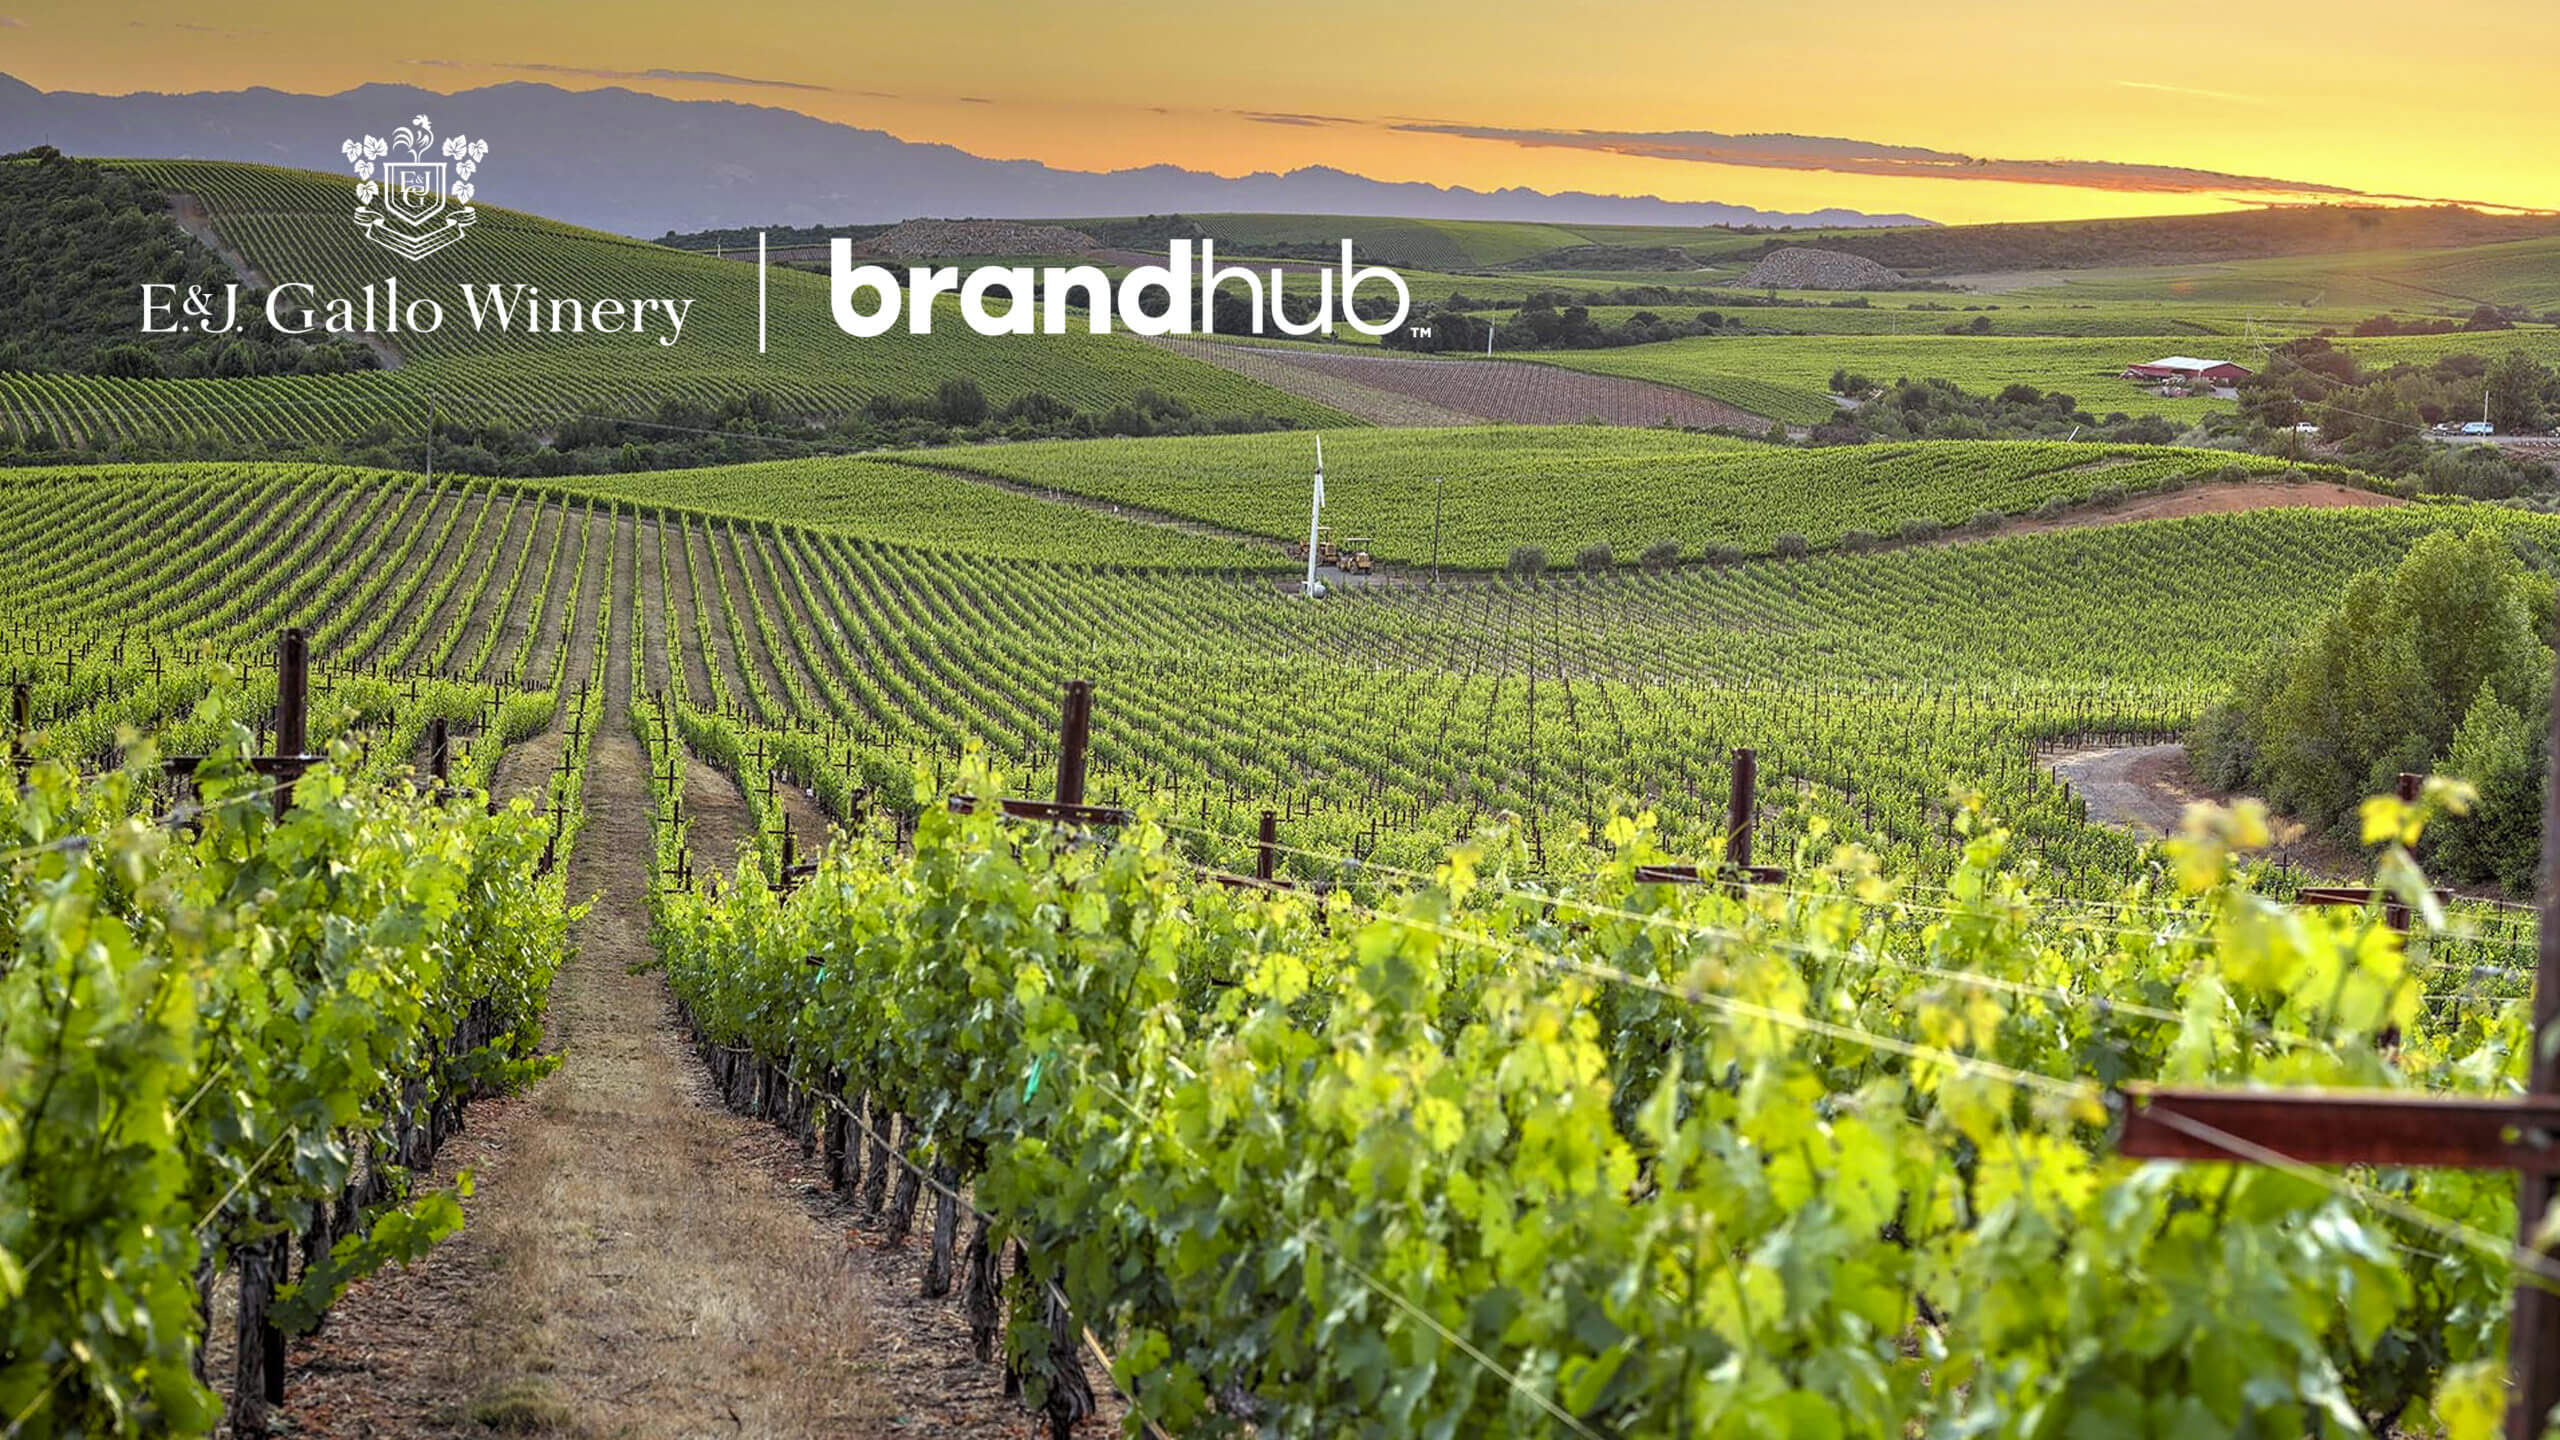 Winery field with E&J Gallo Winery and brandhub logos in the top left corner